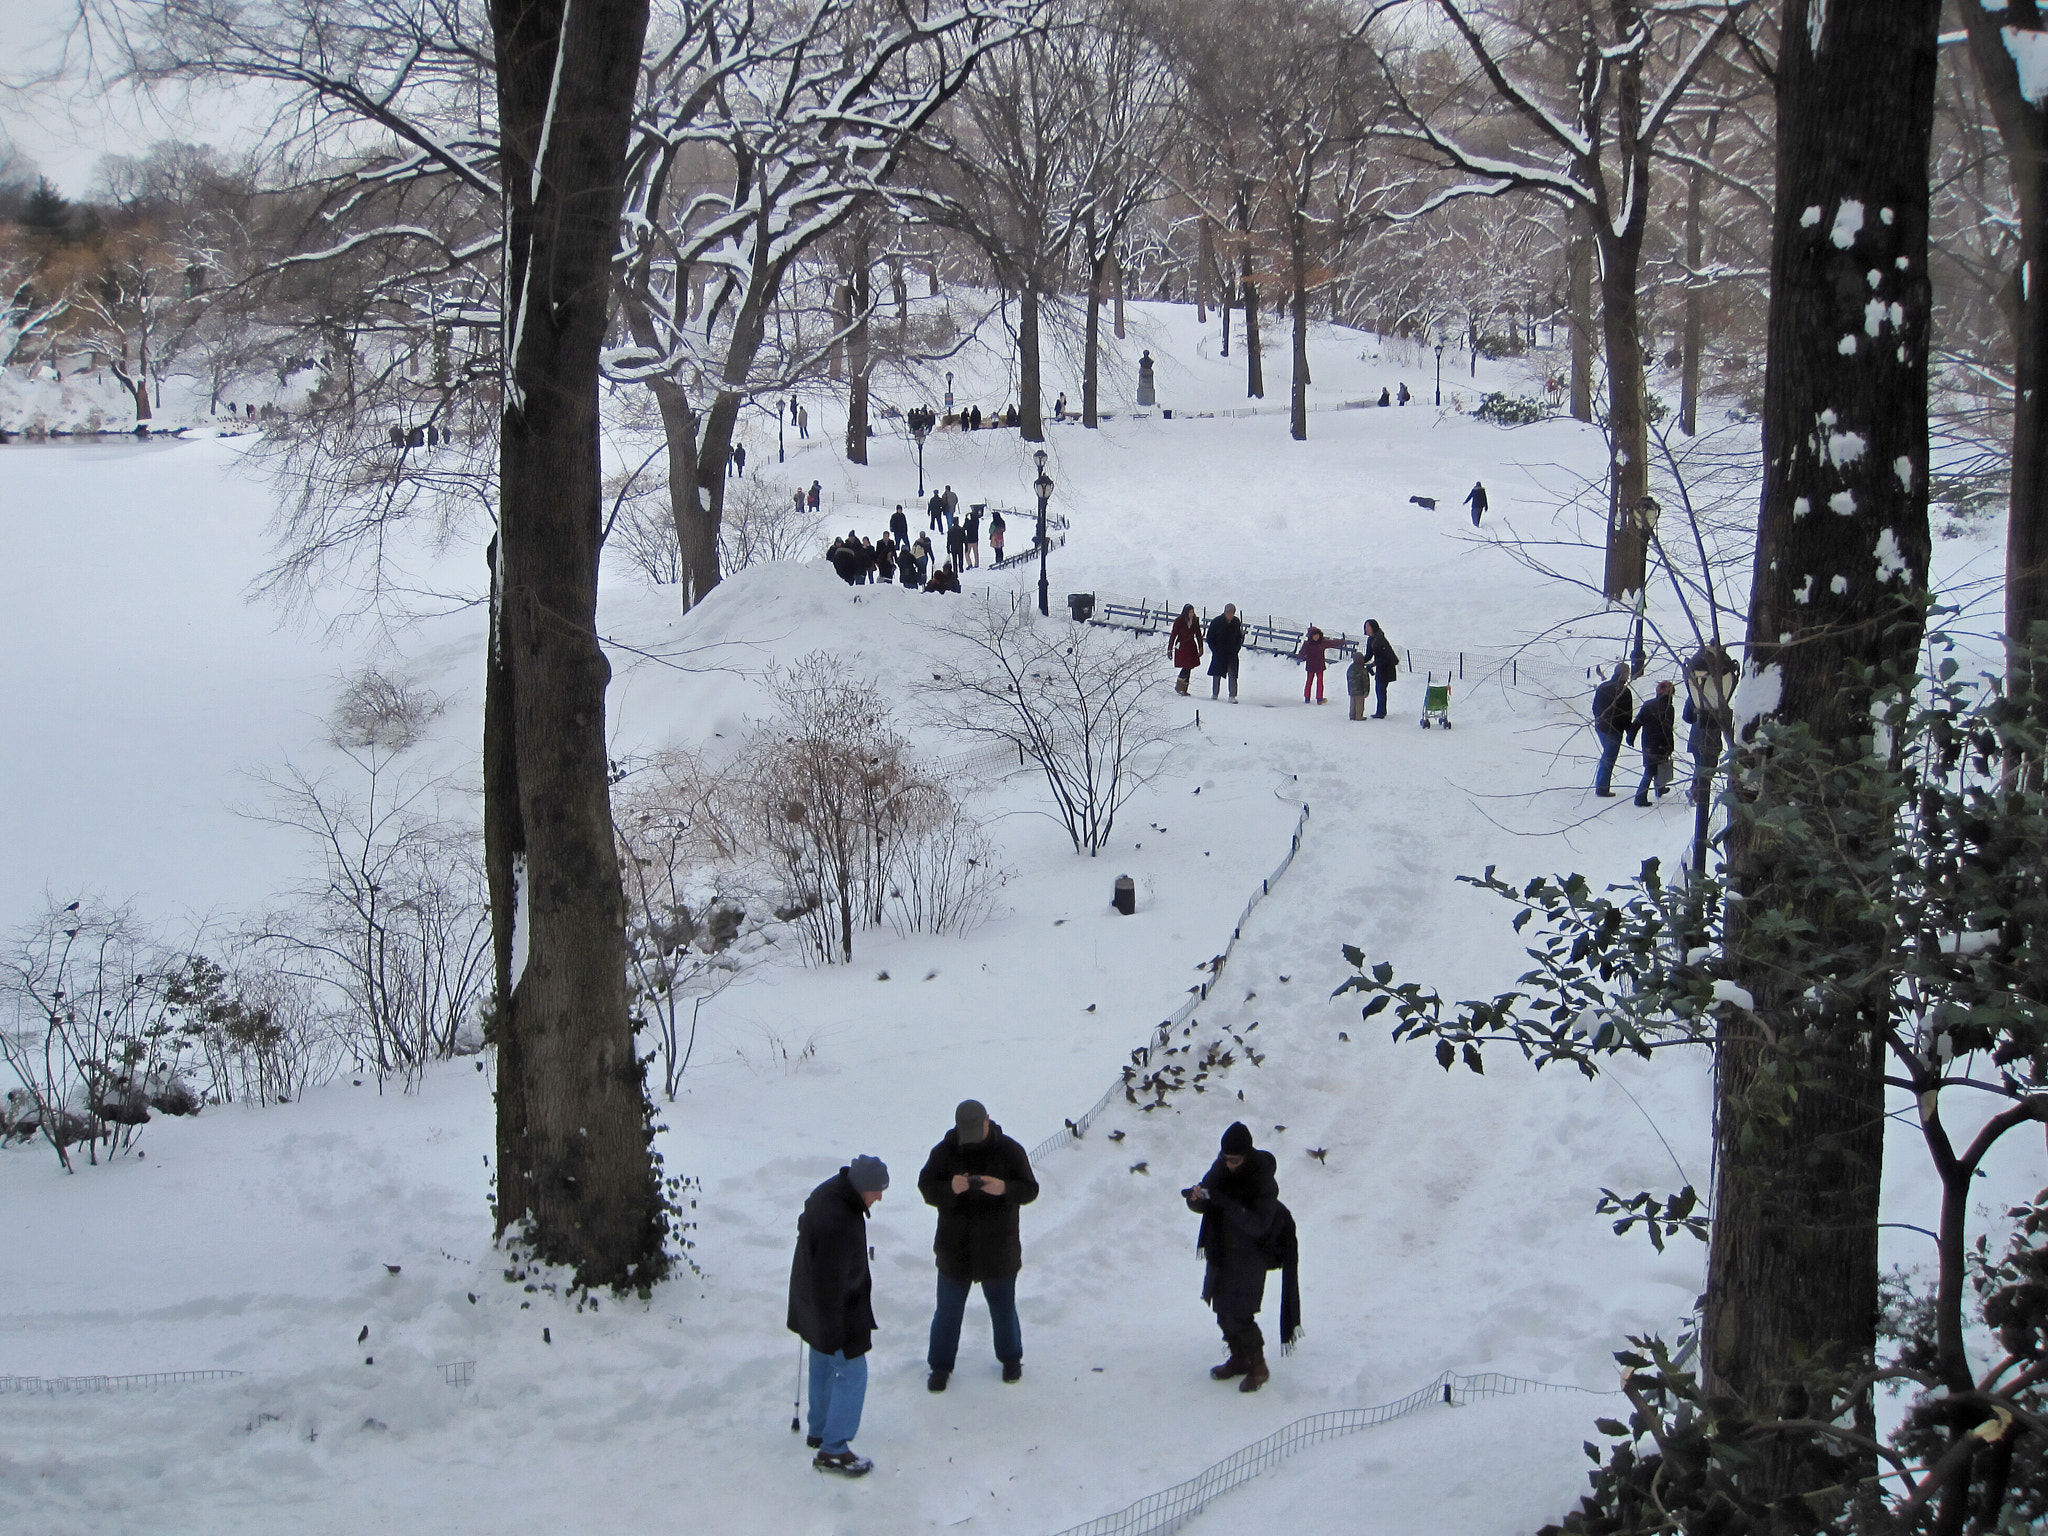 Canon PowerShot SD970 IS (Digital IXUS 990 IS / IXY Digital 830 IS) sample photo. Winter scene in central park, nyc photography